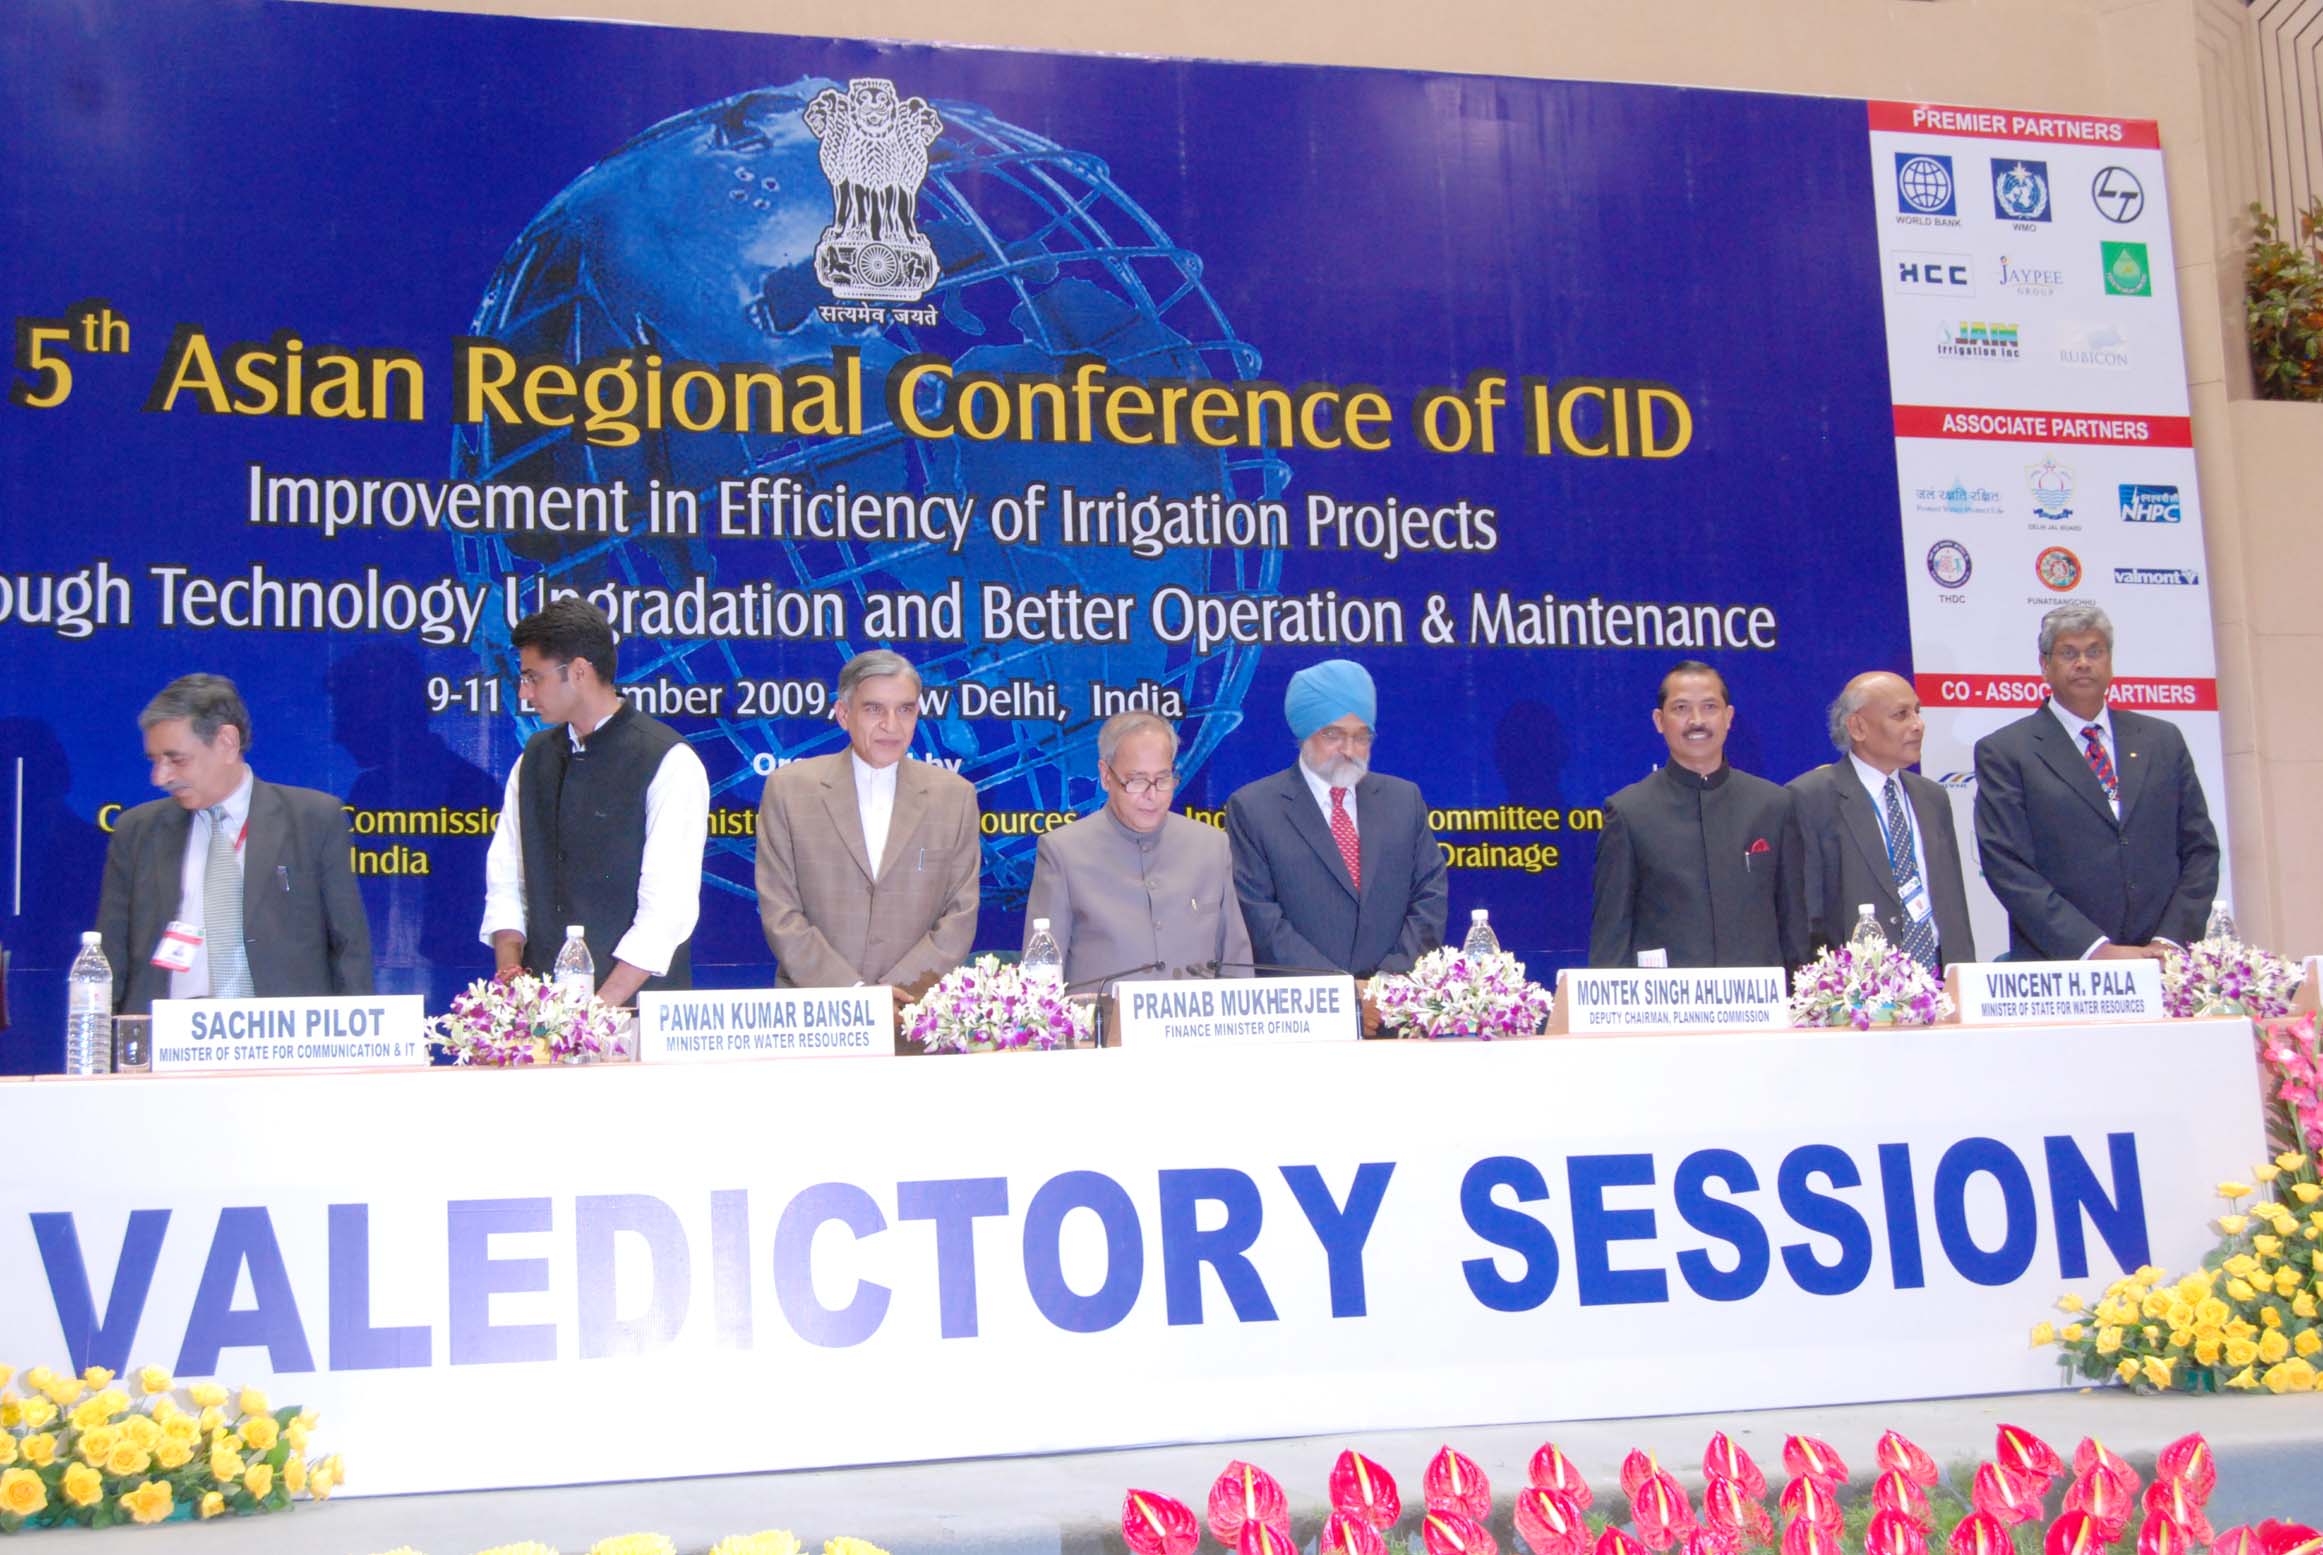 Dignitaries attending the 5th Asian Regional Conference, New Delhi, 2009